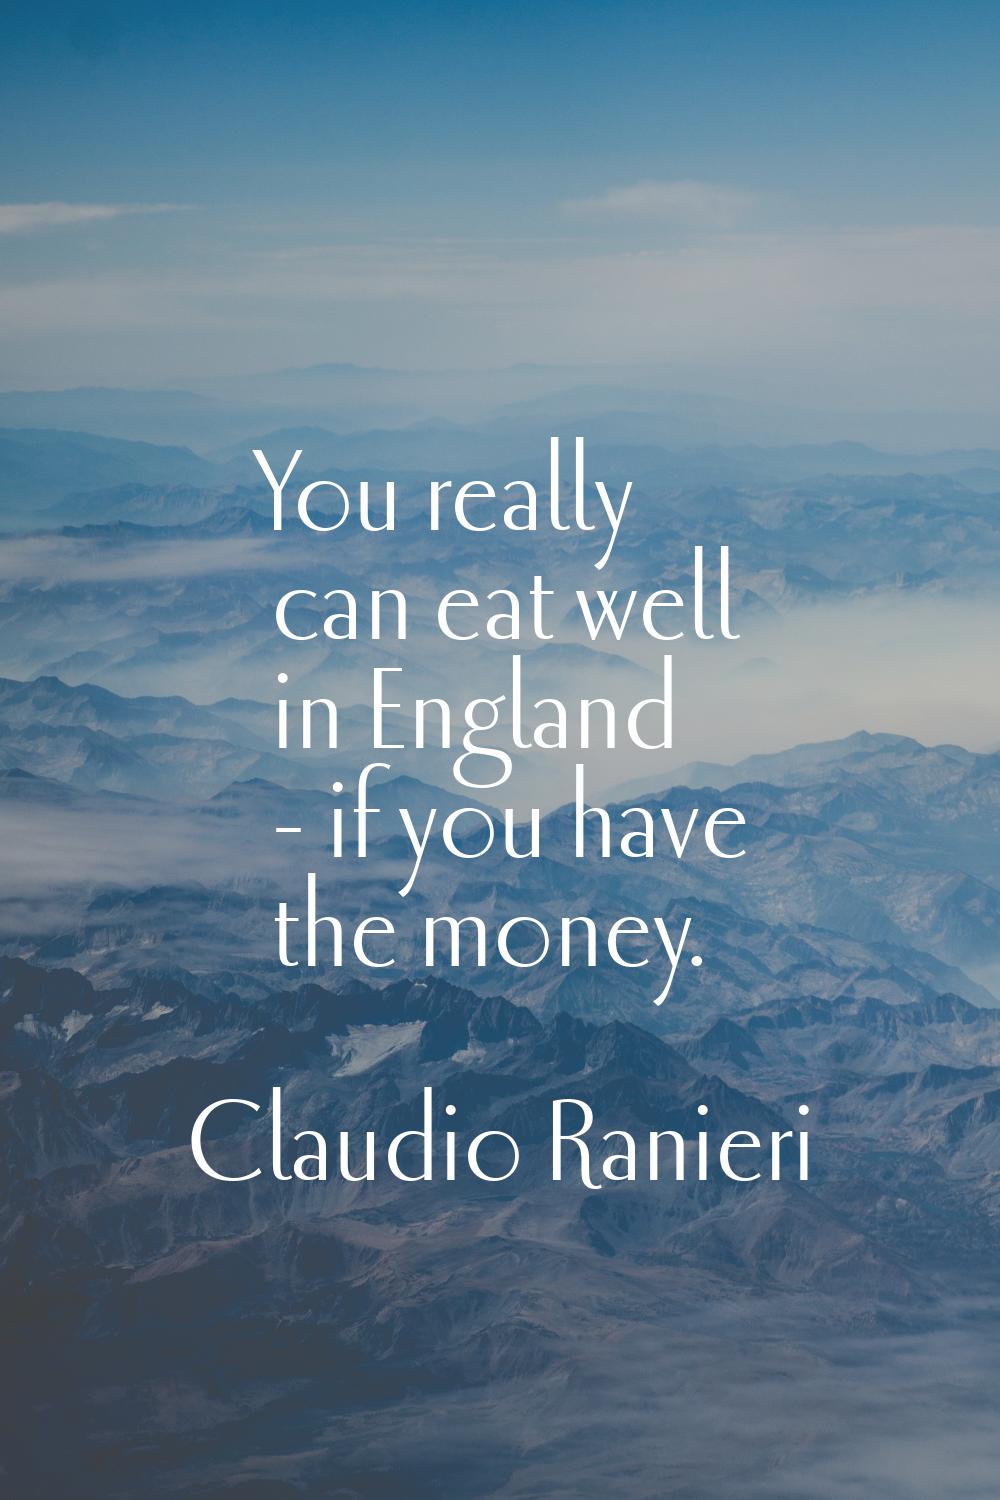 You really can eat well in England - if you have the money.